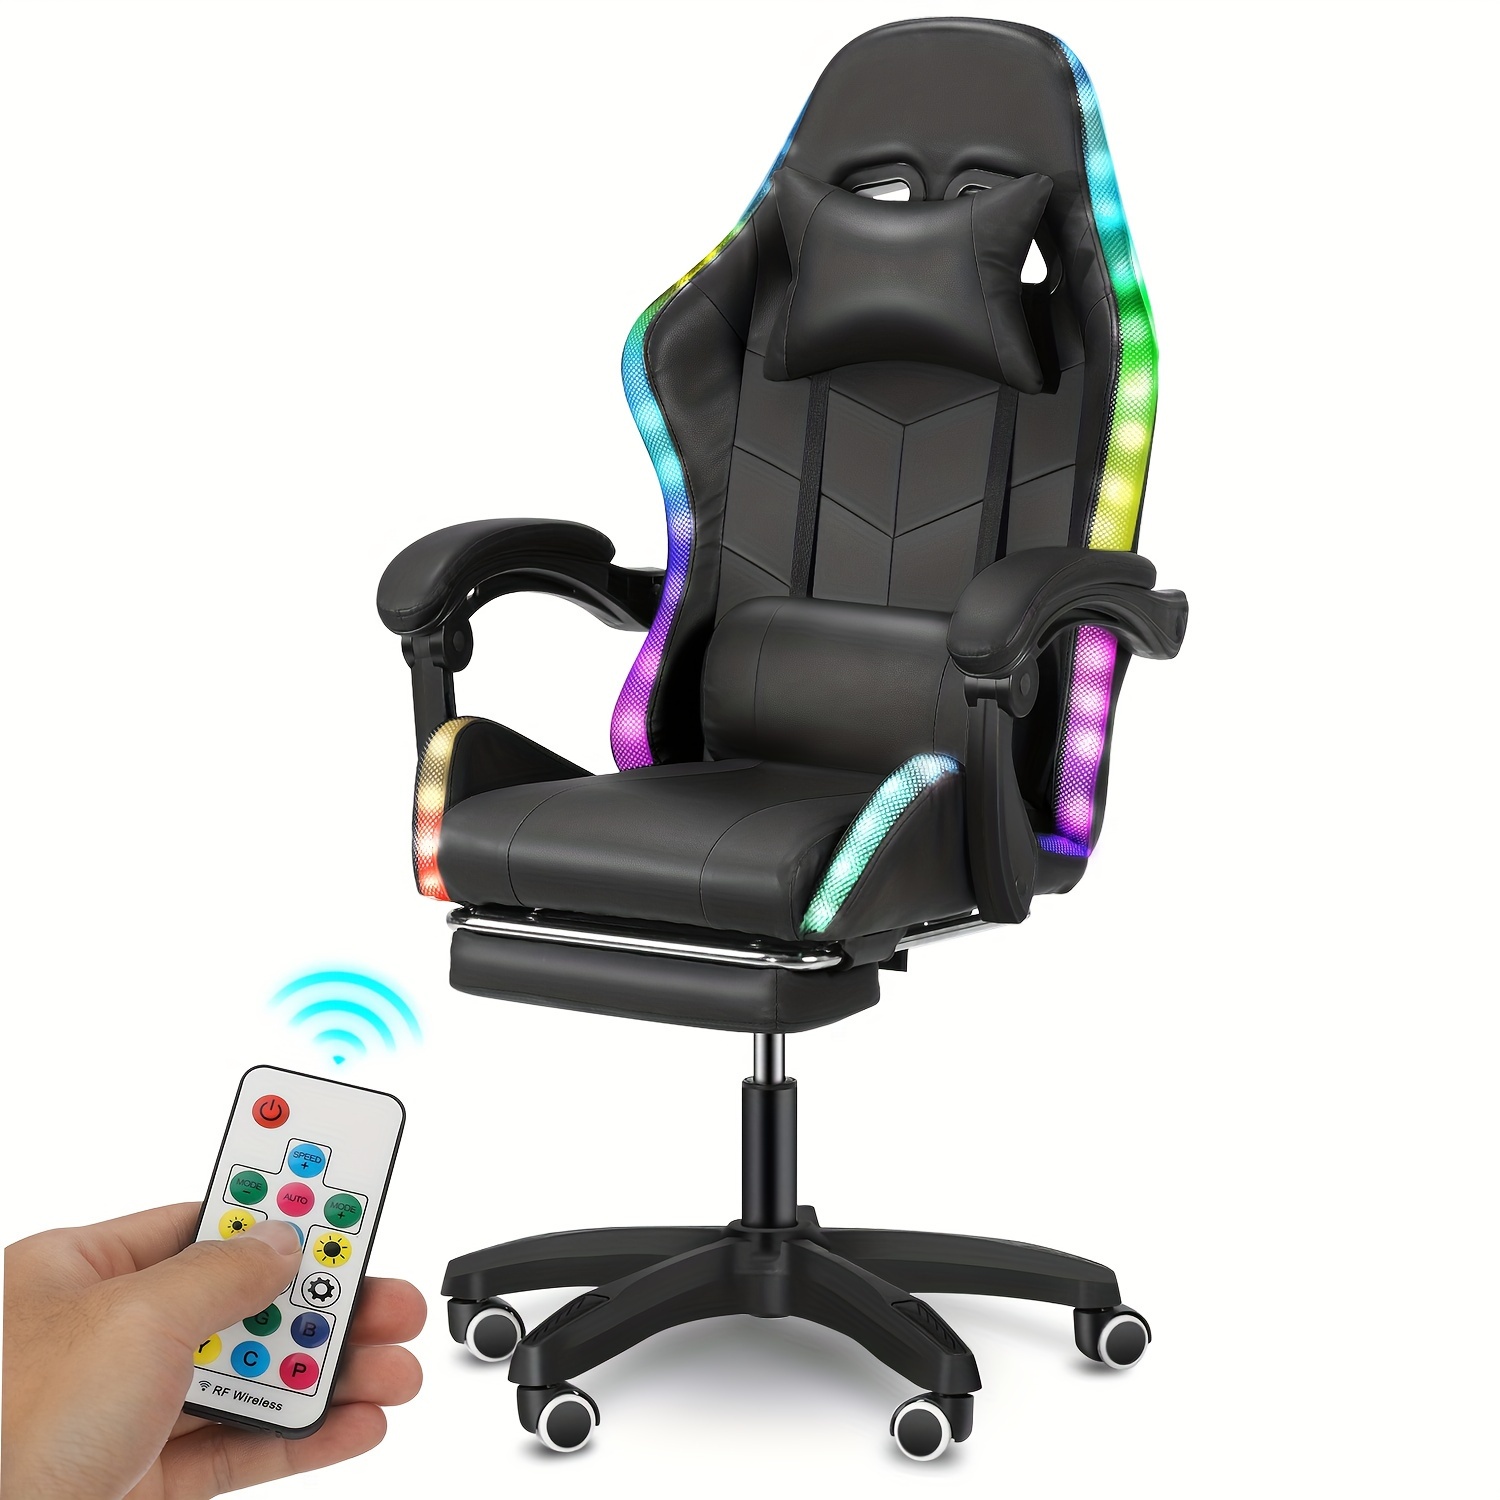 

Gaming Chair With Pu Leather Office Chair With Footrest And Led Lights Ergonomic Gamer Chair With Lumbar Support And Headrest Adjustable Swivel For Home Office 330lb, Black